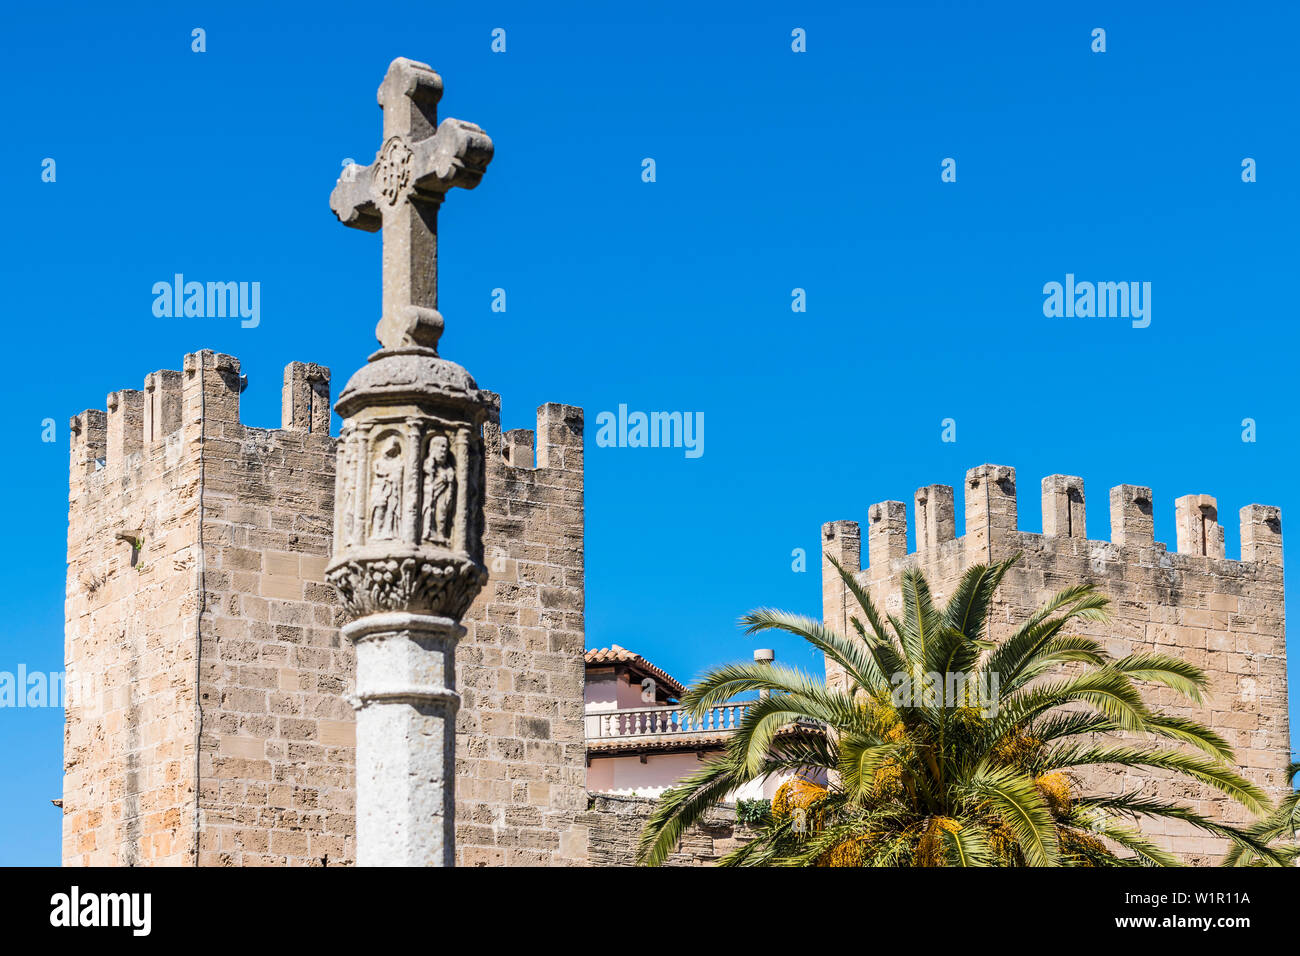 City gate with column and stone cross, Mallorca, Spain Stock Photo